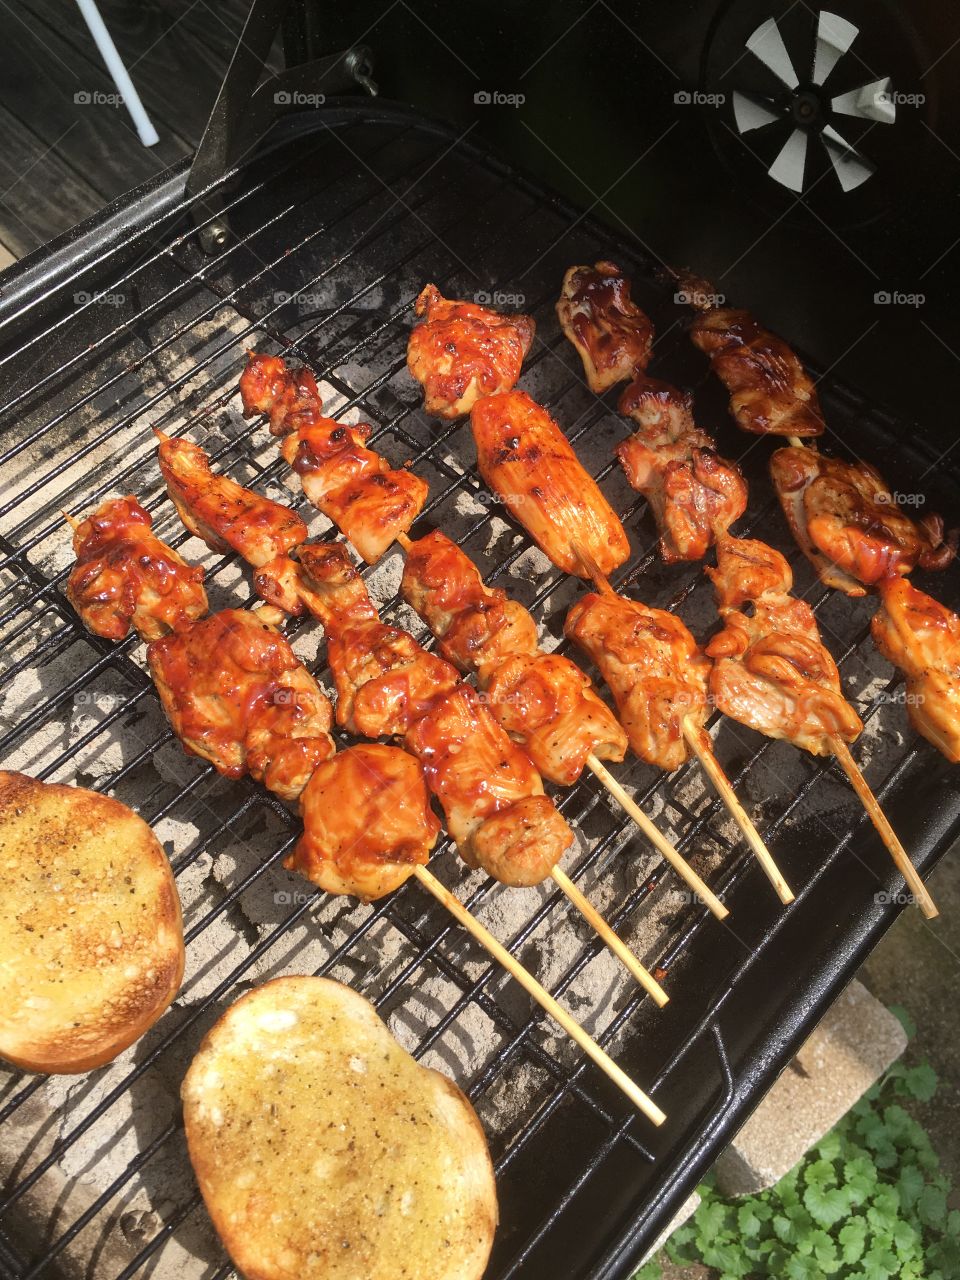 Barbecue  chicken thighs on kabob sticks, with roasted garlic Parmesan bread.  Happy Fourth of July!